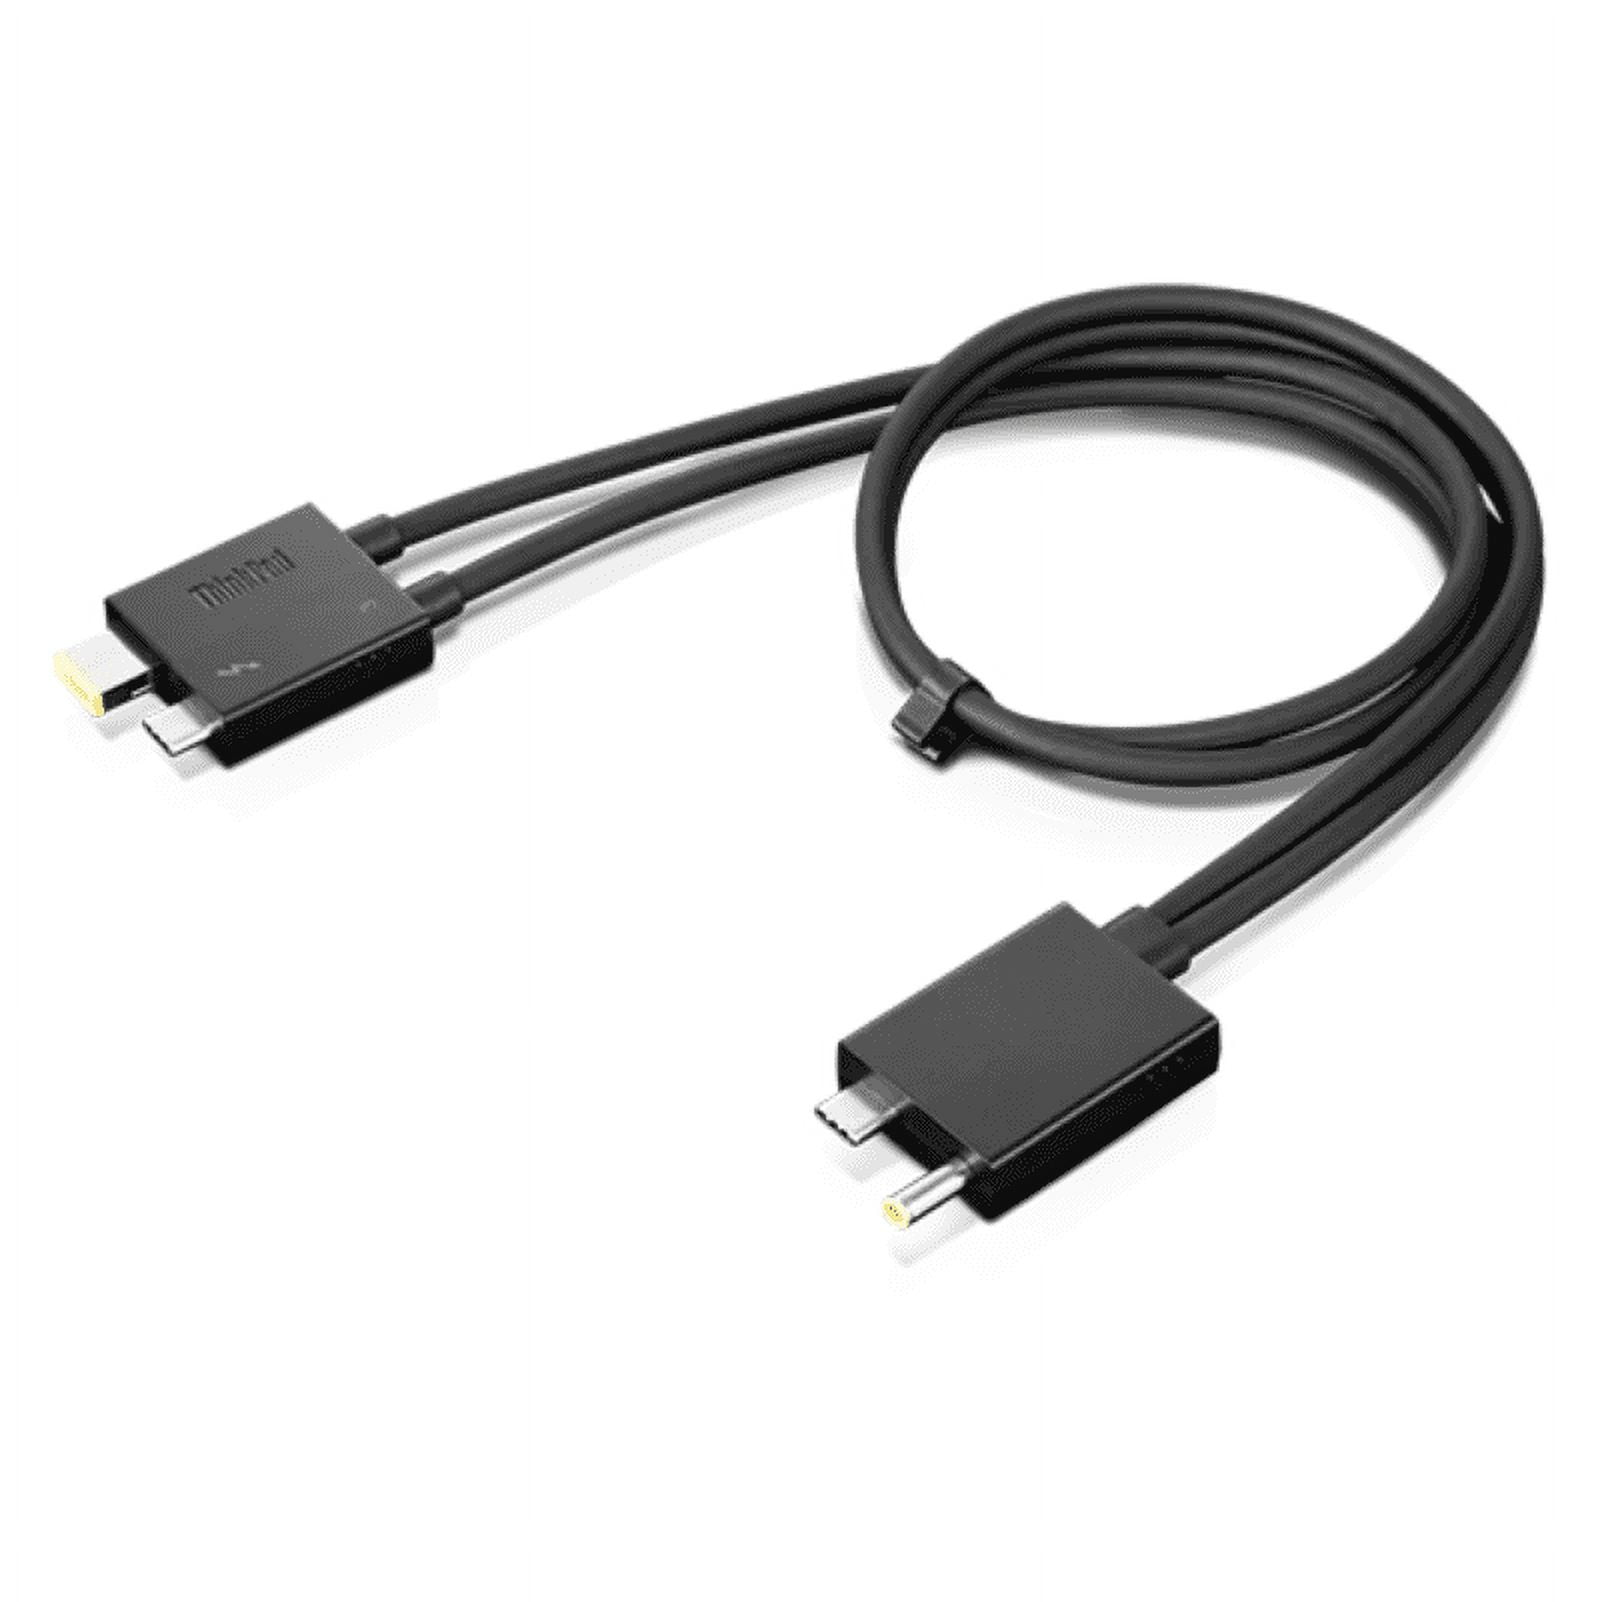 USB C to HDMI Cable 6ft, [USB 3.1 Type C to HDMI 4K, High-Speed] USB Type C  to HDMI Cable for Home Office, [Thunderbolt 3 Compatible] Compatible With  Lenovo Tab P12 Pro 